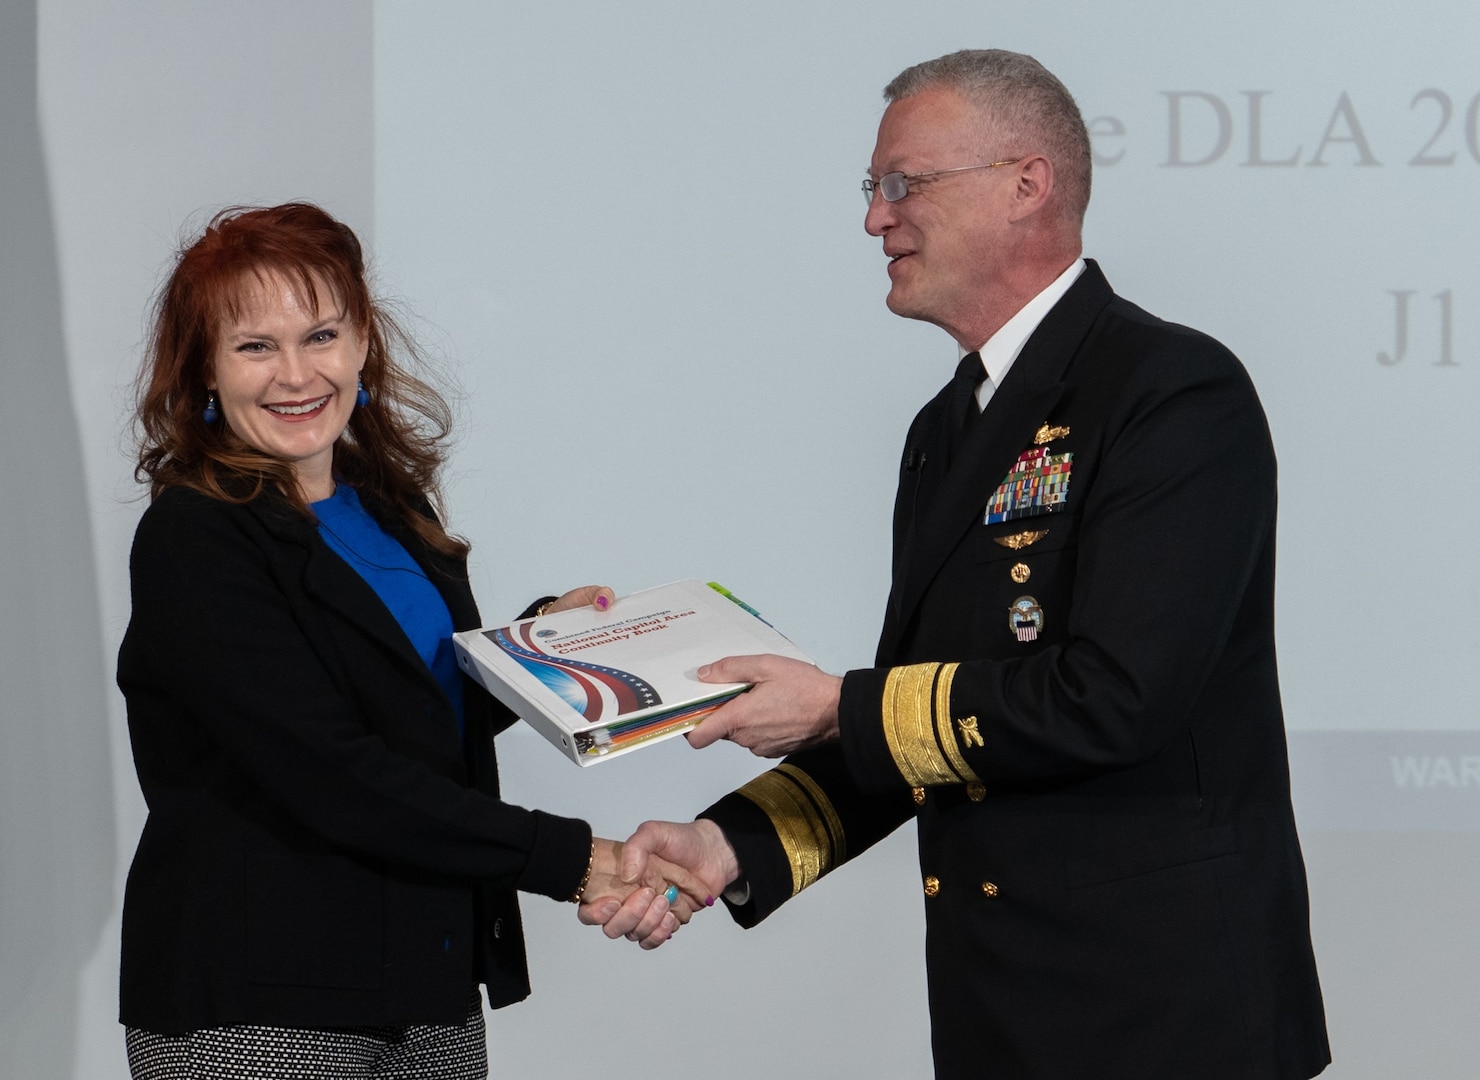 Navy Rear Adm. Grafton Chase, director of the DLA Joint Reserve Force and DLA CFC vice chair, passes the CFC campaign book to Sharyn Saunders, DLA Human Resources director and chair of the 2022 CFC campaign.  (Photo by Christopher Lynch, DLA Graphics-Multimedia Division)